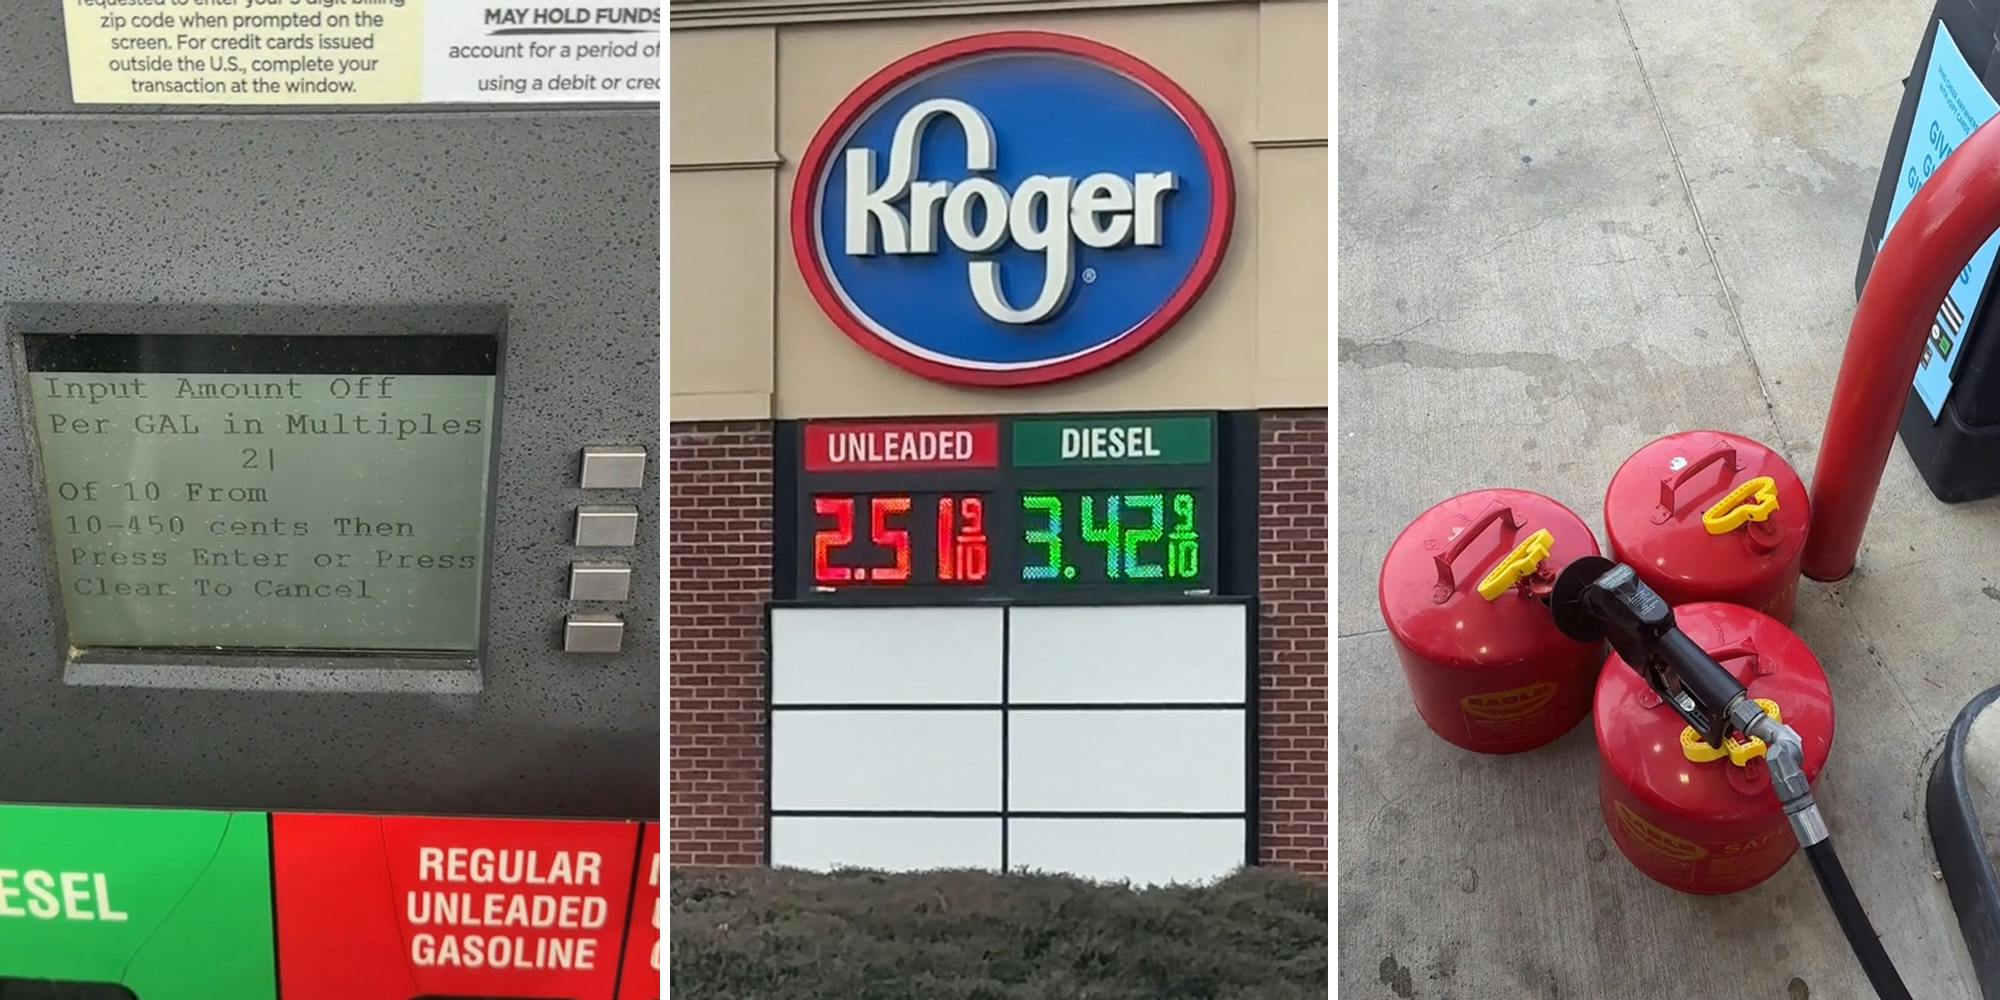 Kroger customer gets 34 gallons of gas for 66 cents